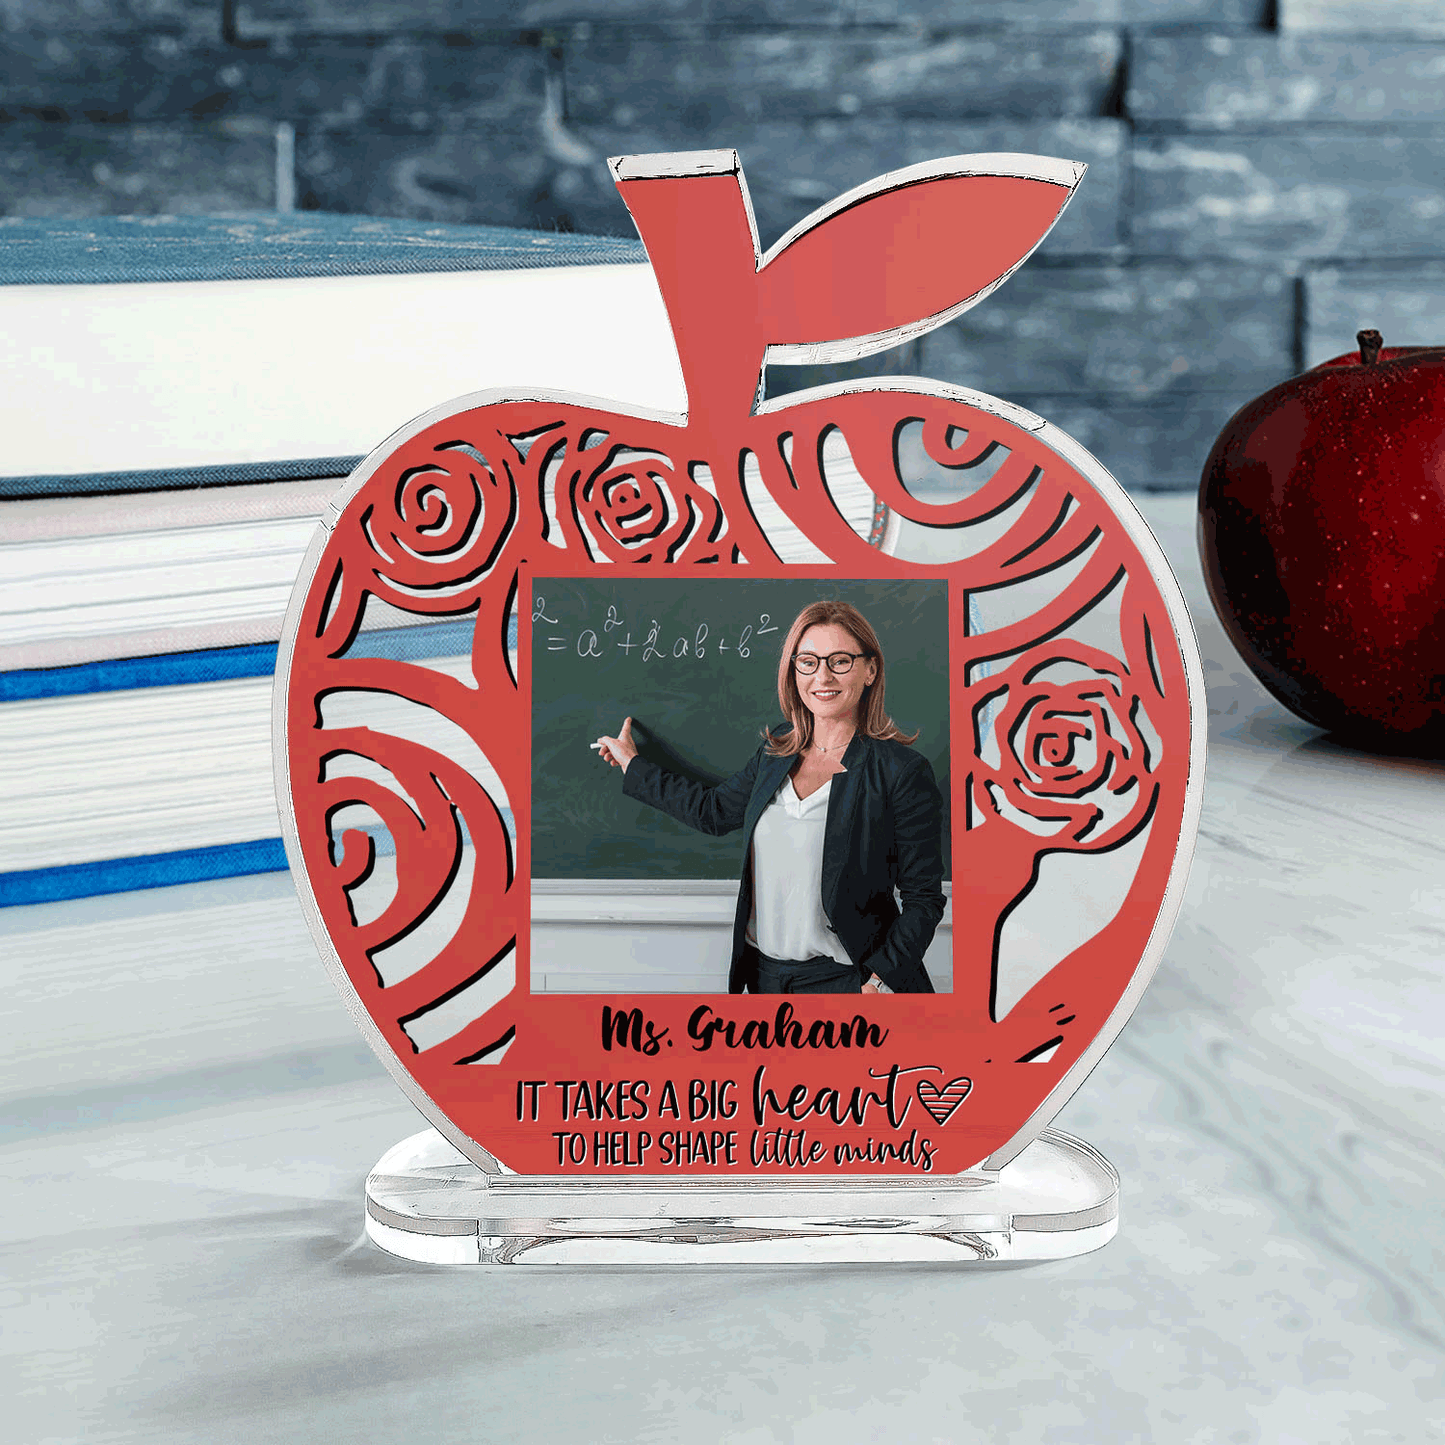 It Takes A Big Heart To Shape Little Minds - Personalized Apple Shaped Acrylic Plaque - Birthday, School Leaving, Year End, Appreciation Gift For Teachers, Teacher Assistants  - From Students & Family 